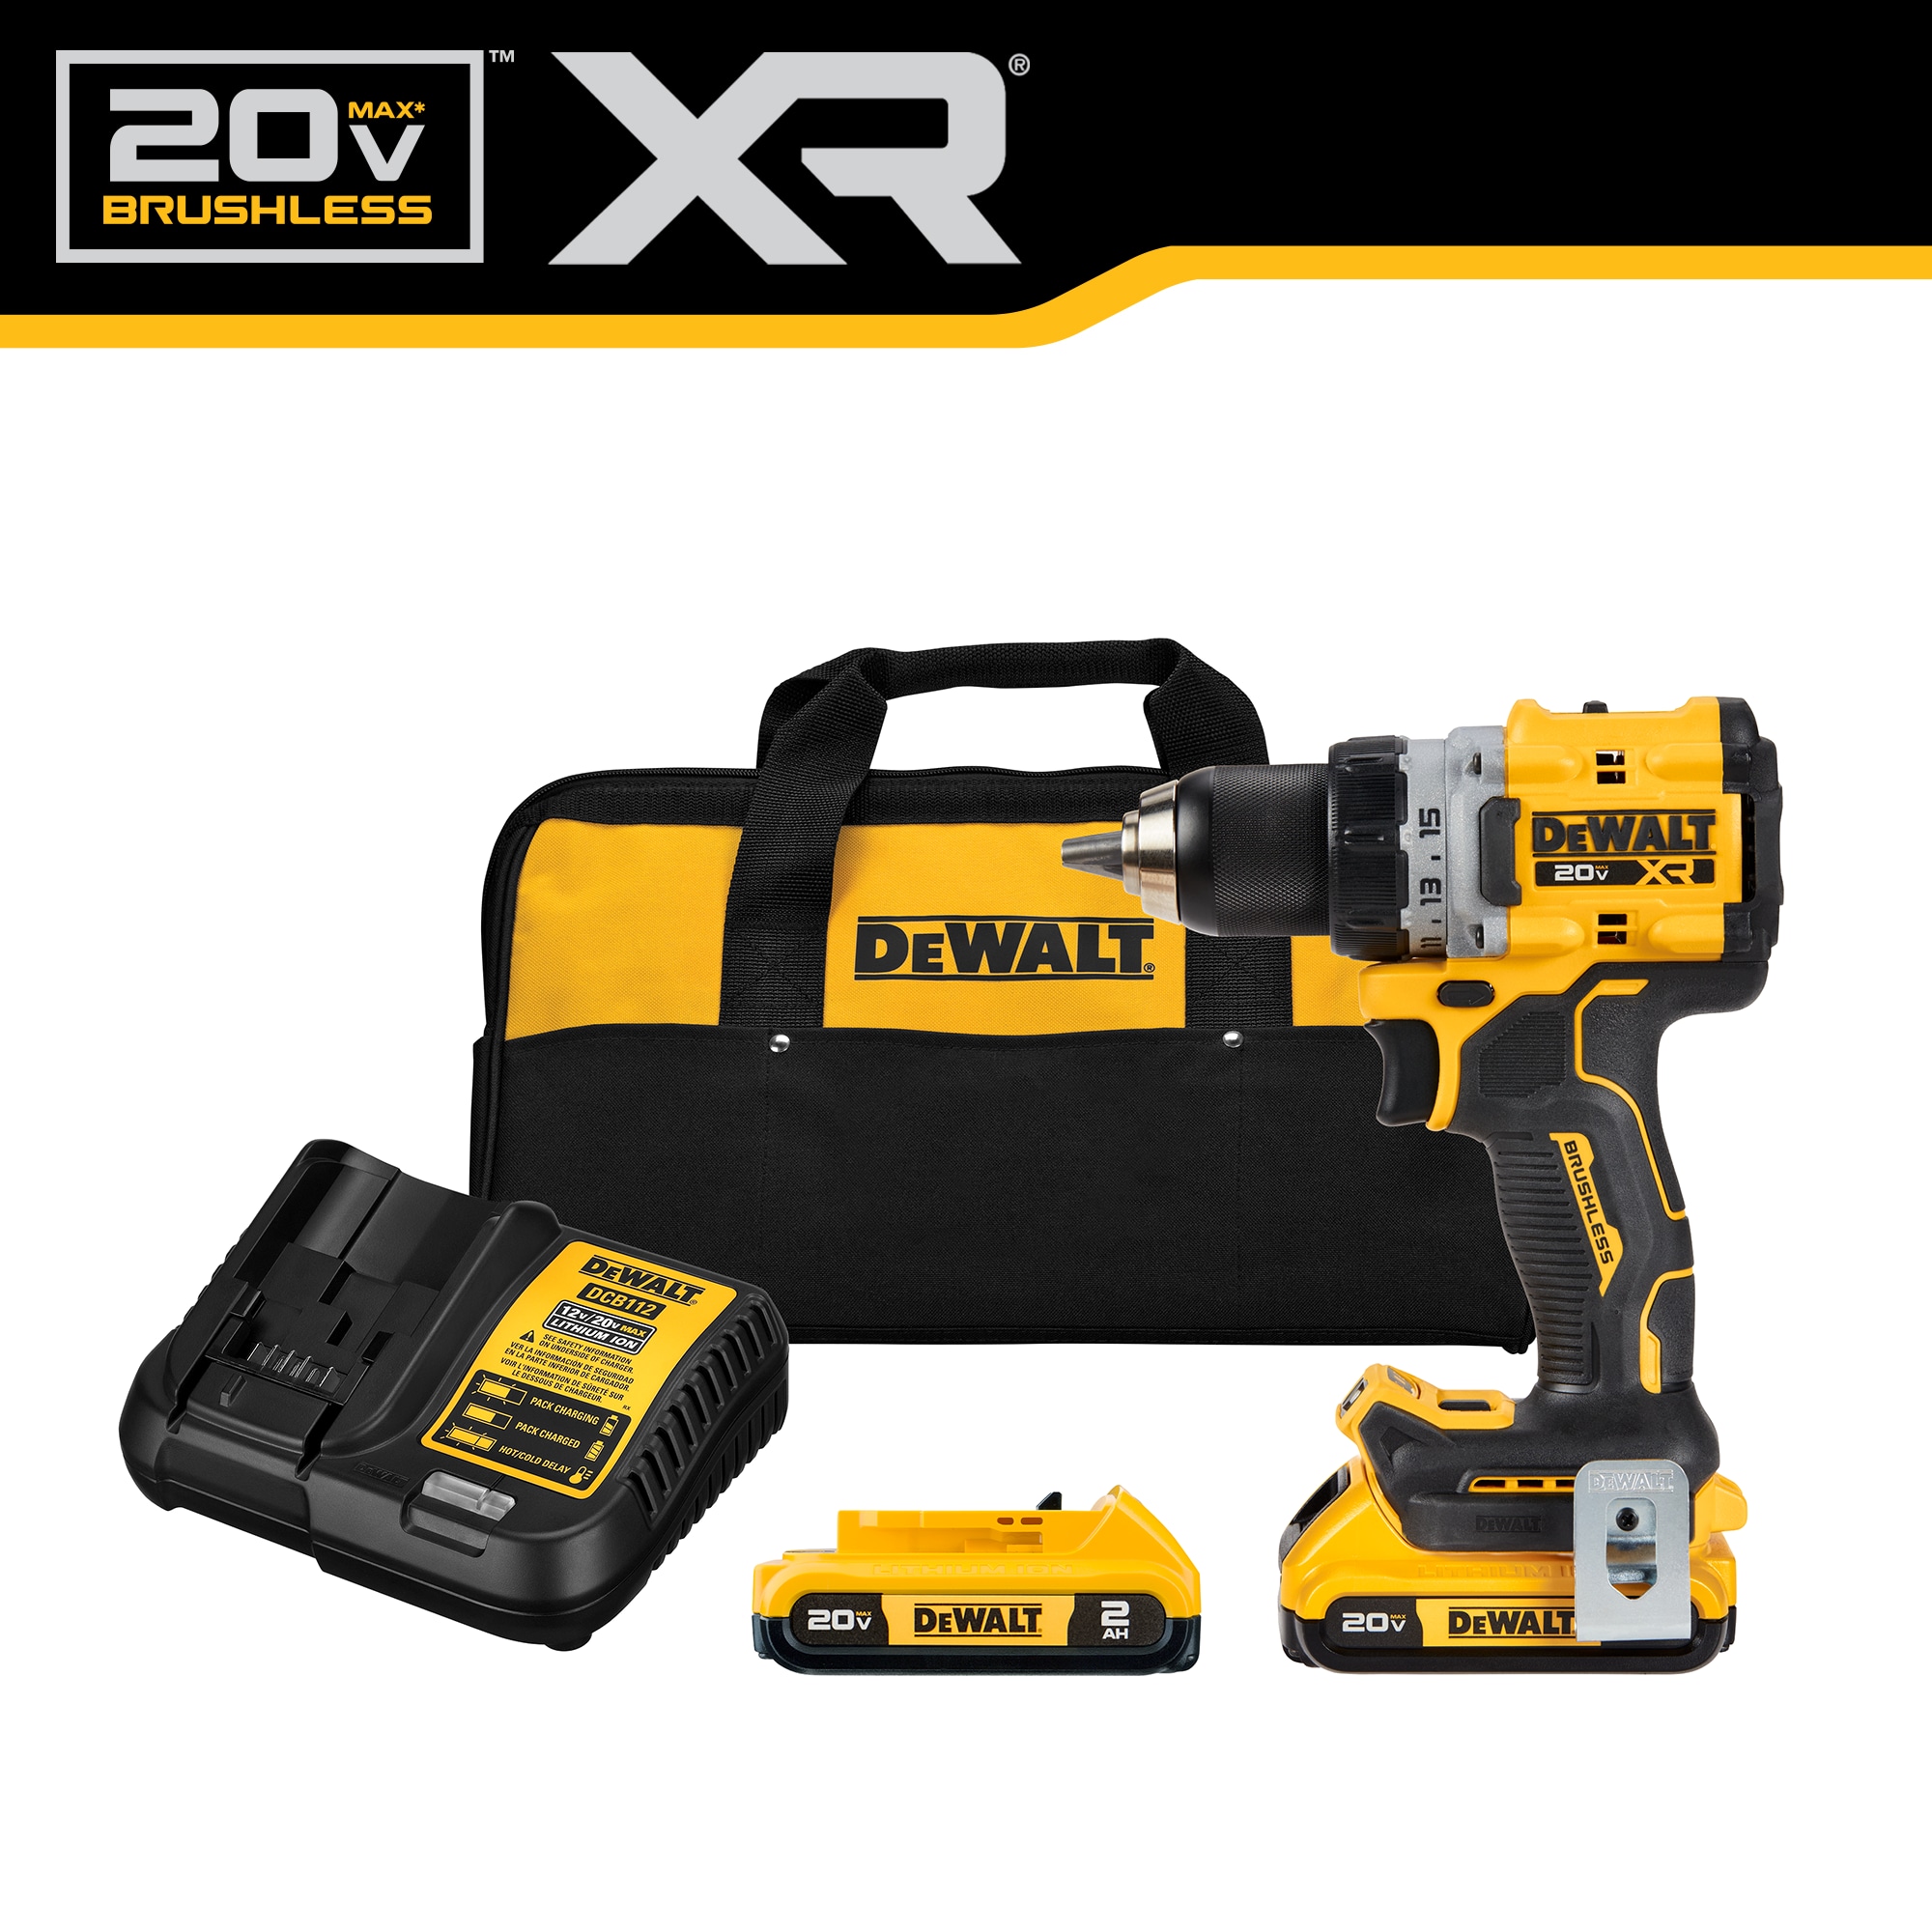  DEWALT 20V MAX XR Drill/Driver, Brushless, 3 Speed, Tool Only  (DCD991B) : Tools & Home Improvement